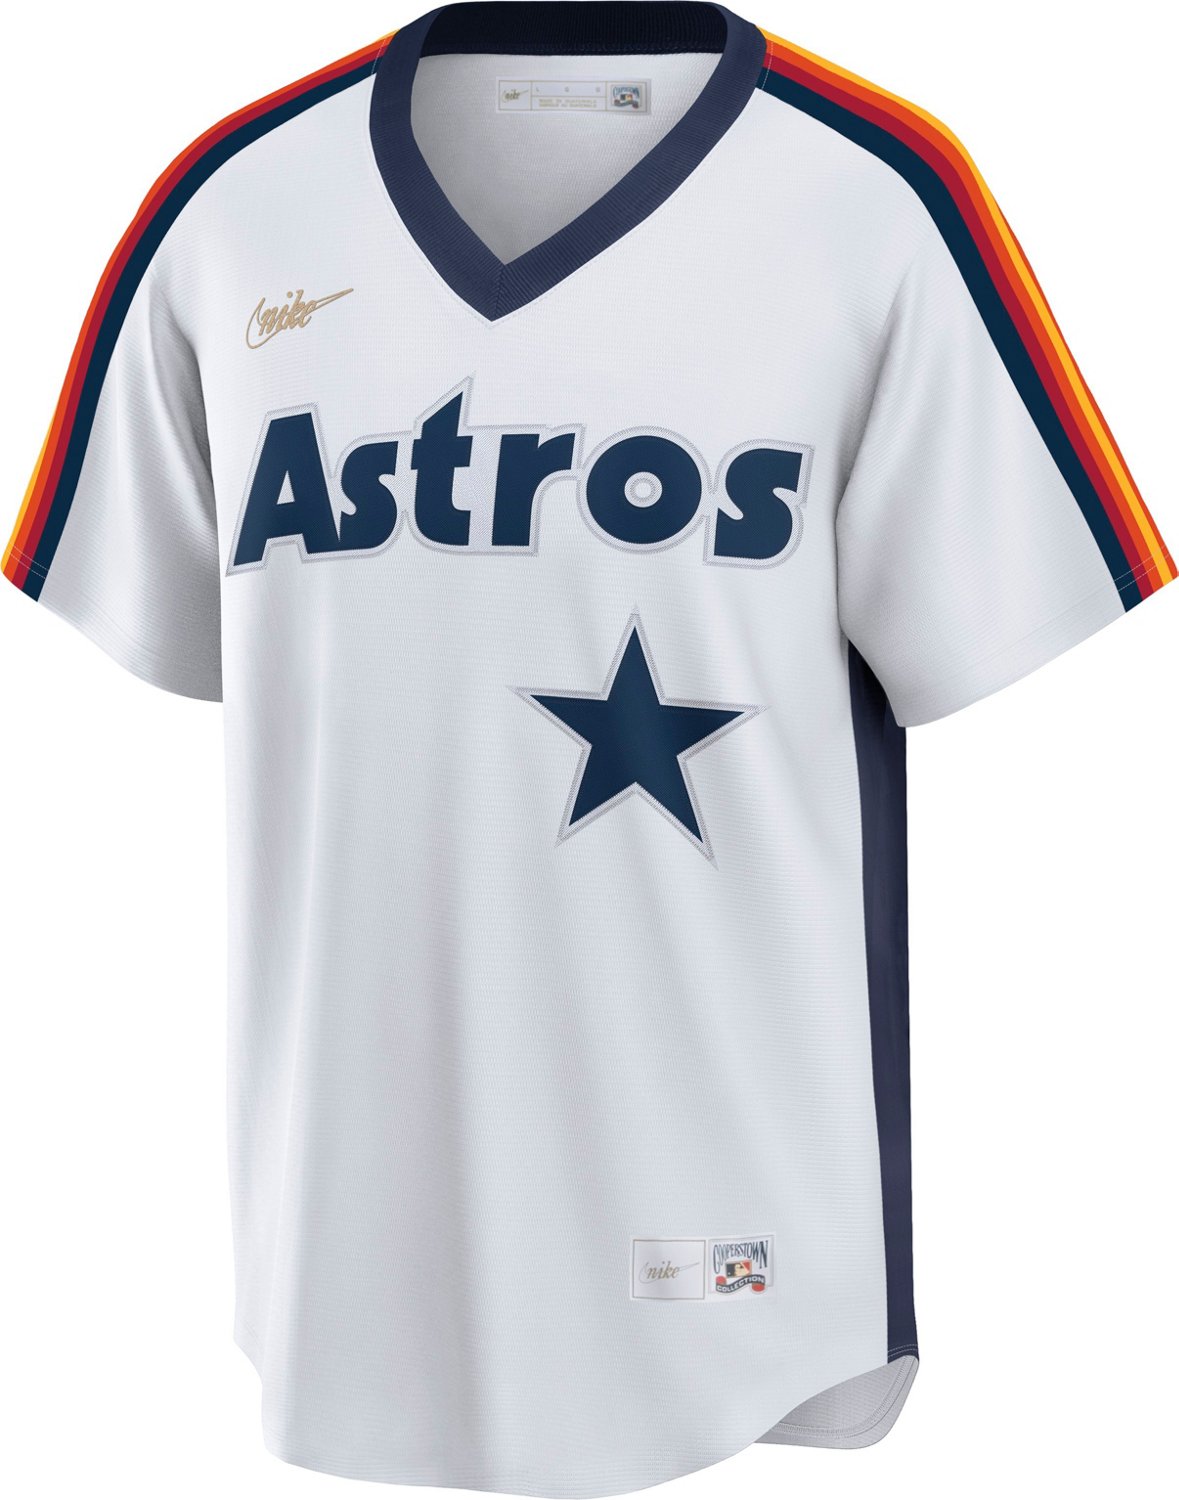 Nike Men's Houston Astros Jeff Bagwell Official Cooperstown Jersey